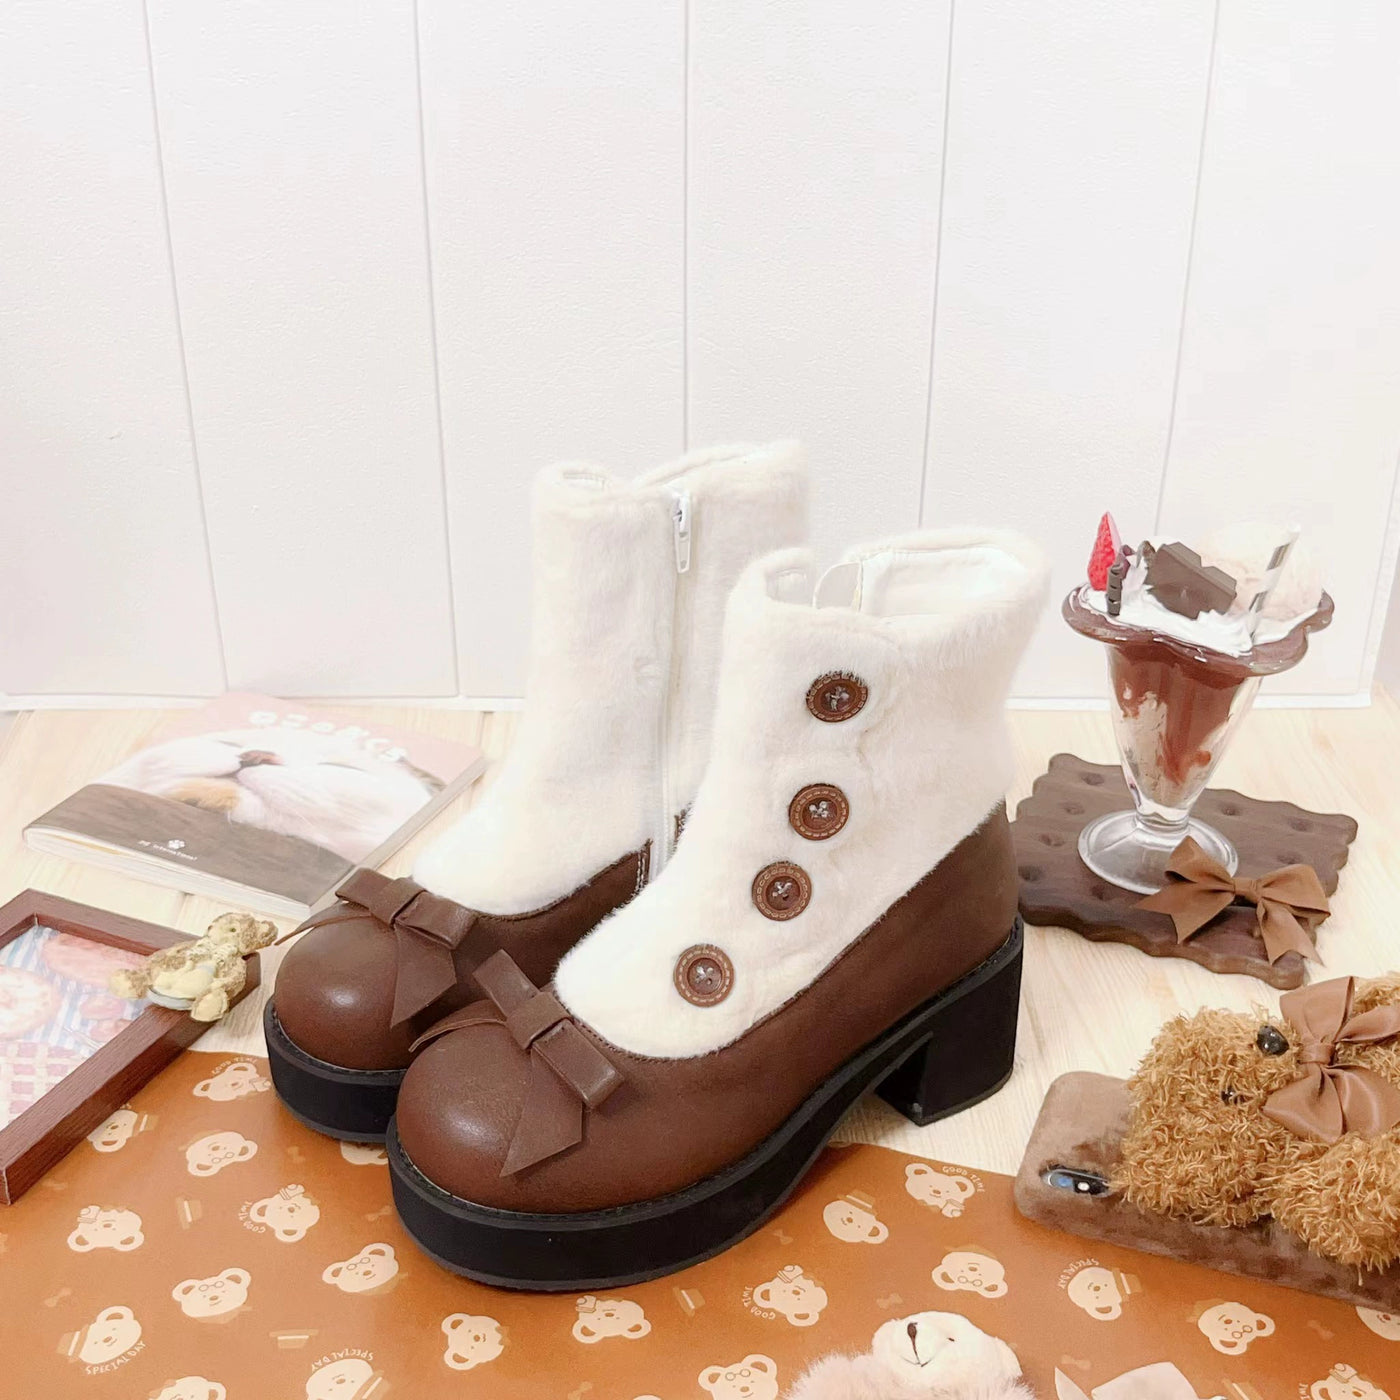 Dolly Doll~Winter Lolita Boots Fur Mary Jane Lolita Low Heel Shoes 34 6cm-Thick Sole-Dark Brown 